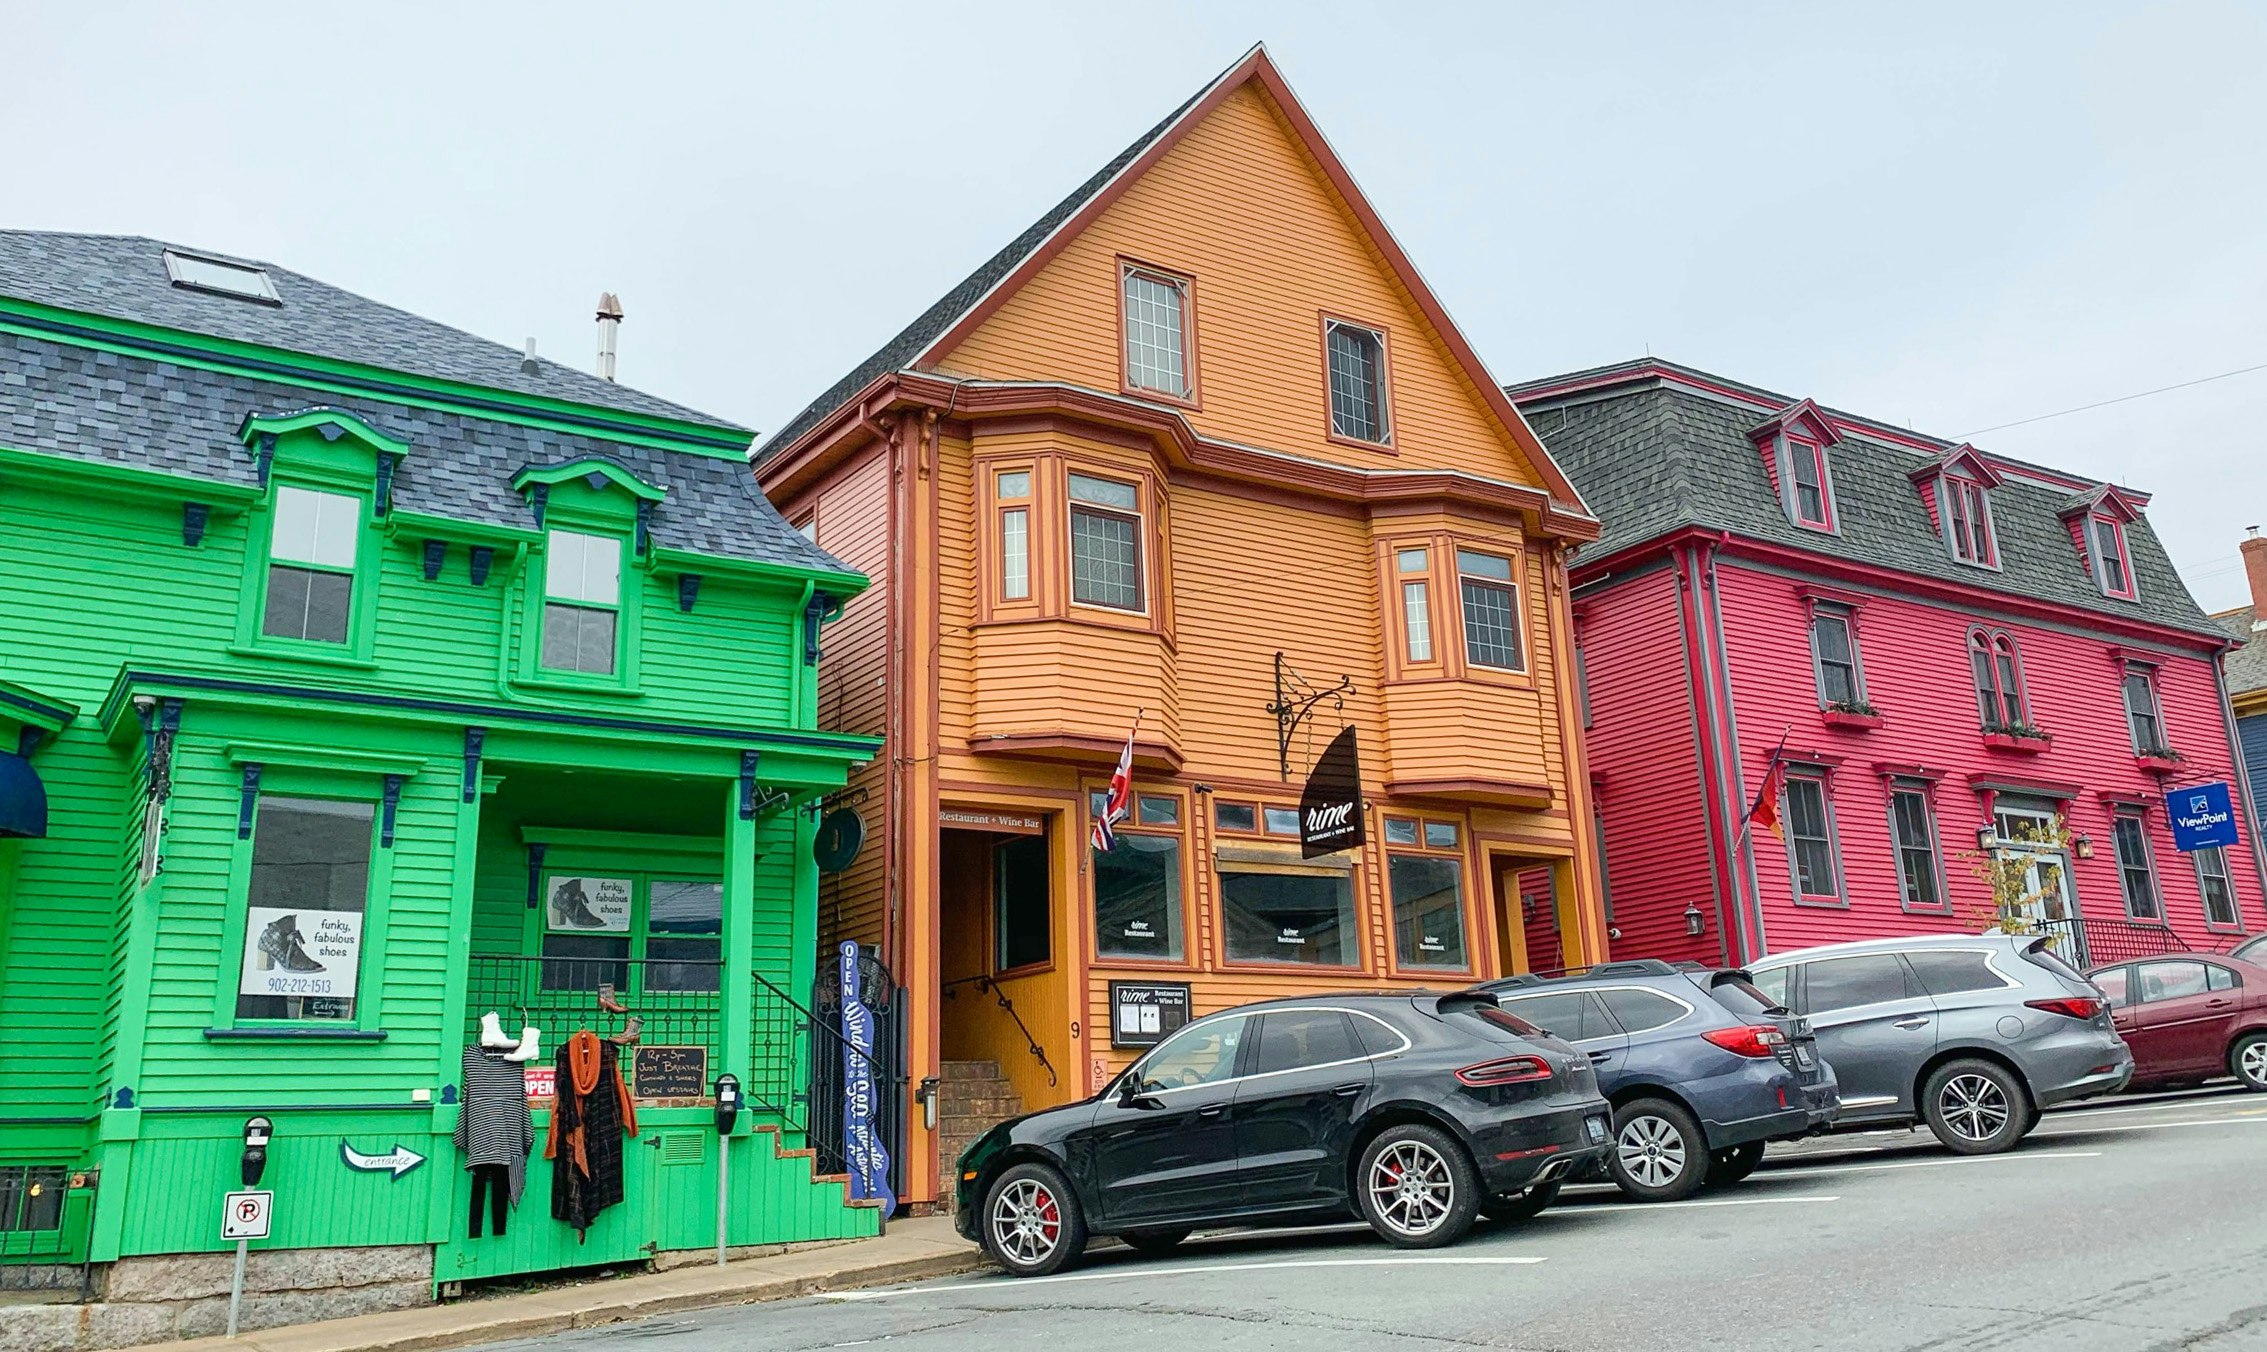 A green, orange and red building are seen on a hill in Lunenberg, Nova Scotia